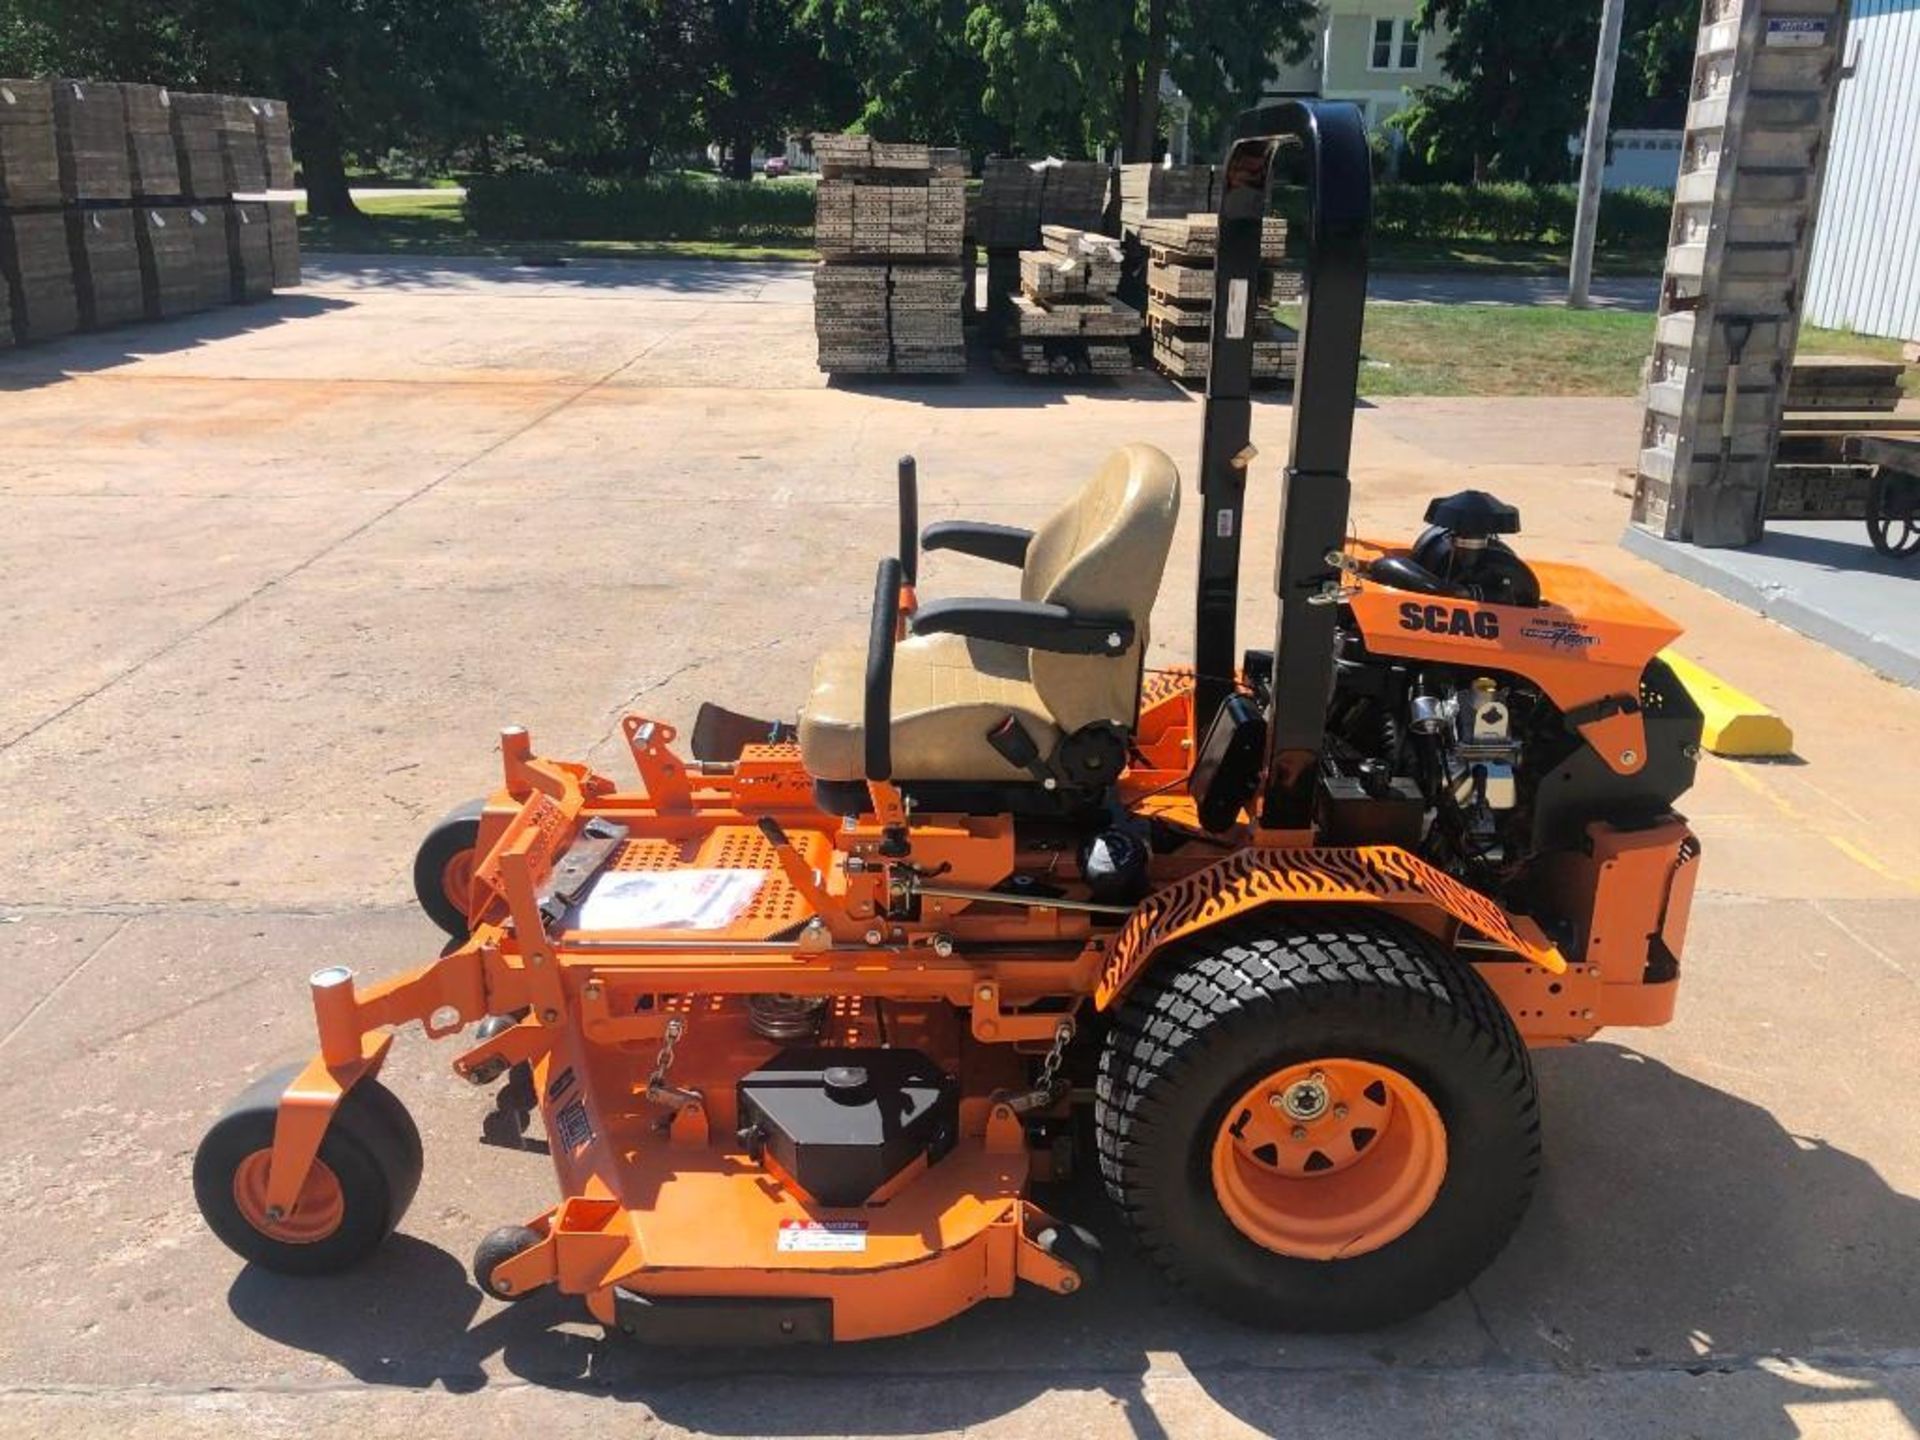 2019 SCAG Turf Tiger II 61" Deck, 78 Hours. Located at 301 E Henry Street, Mt. Pleasant, IA 52641 - Image 3 of 13